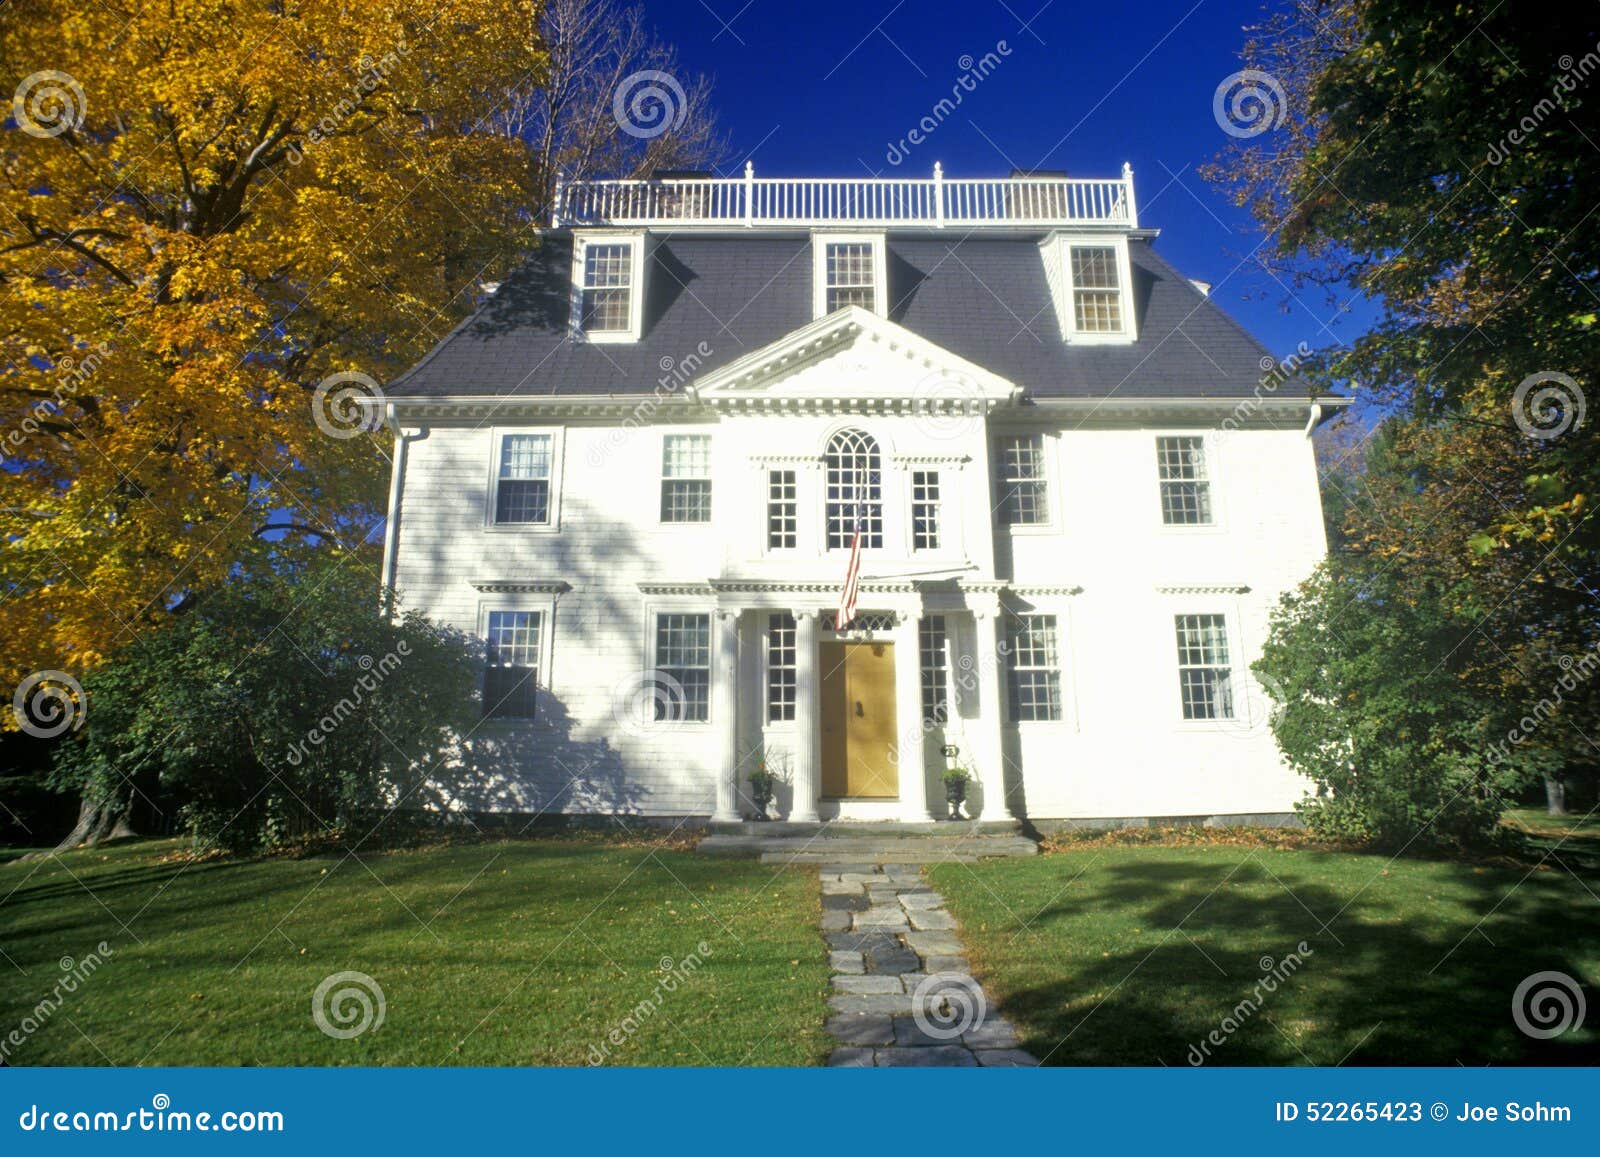 front exterior of home with fall colors, litchfield, ct